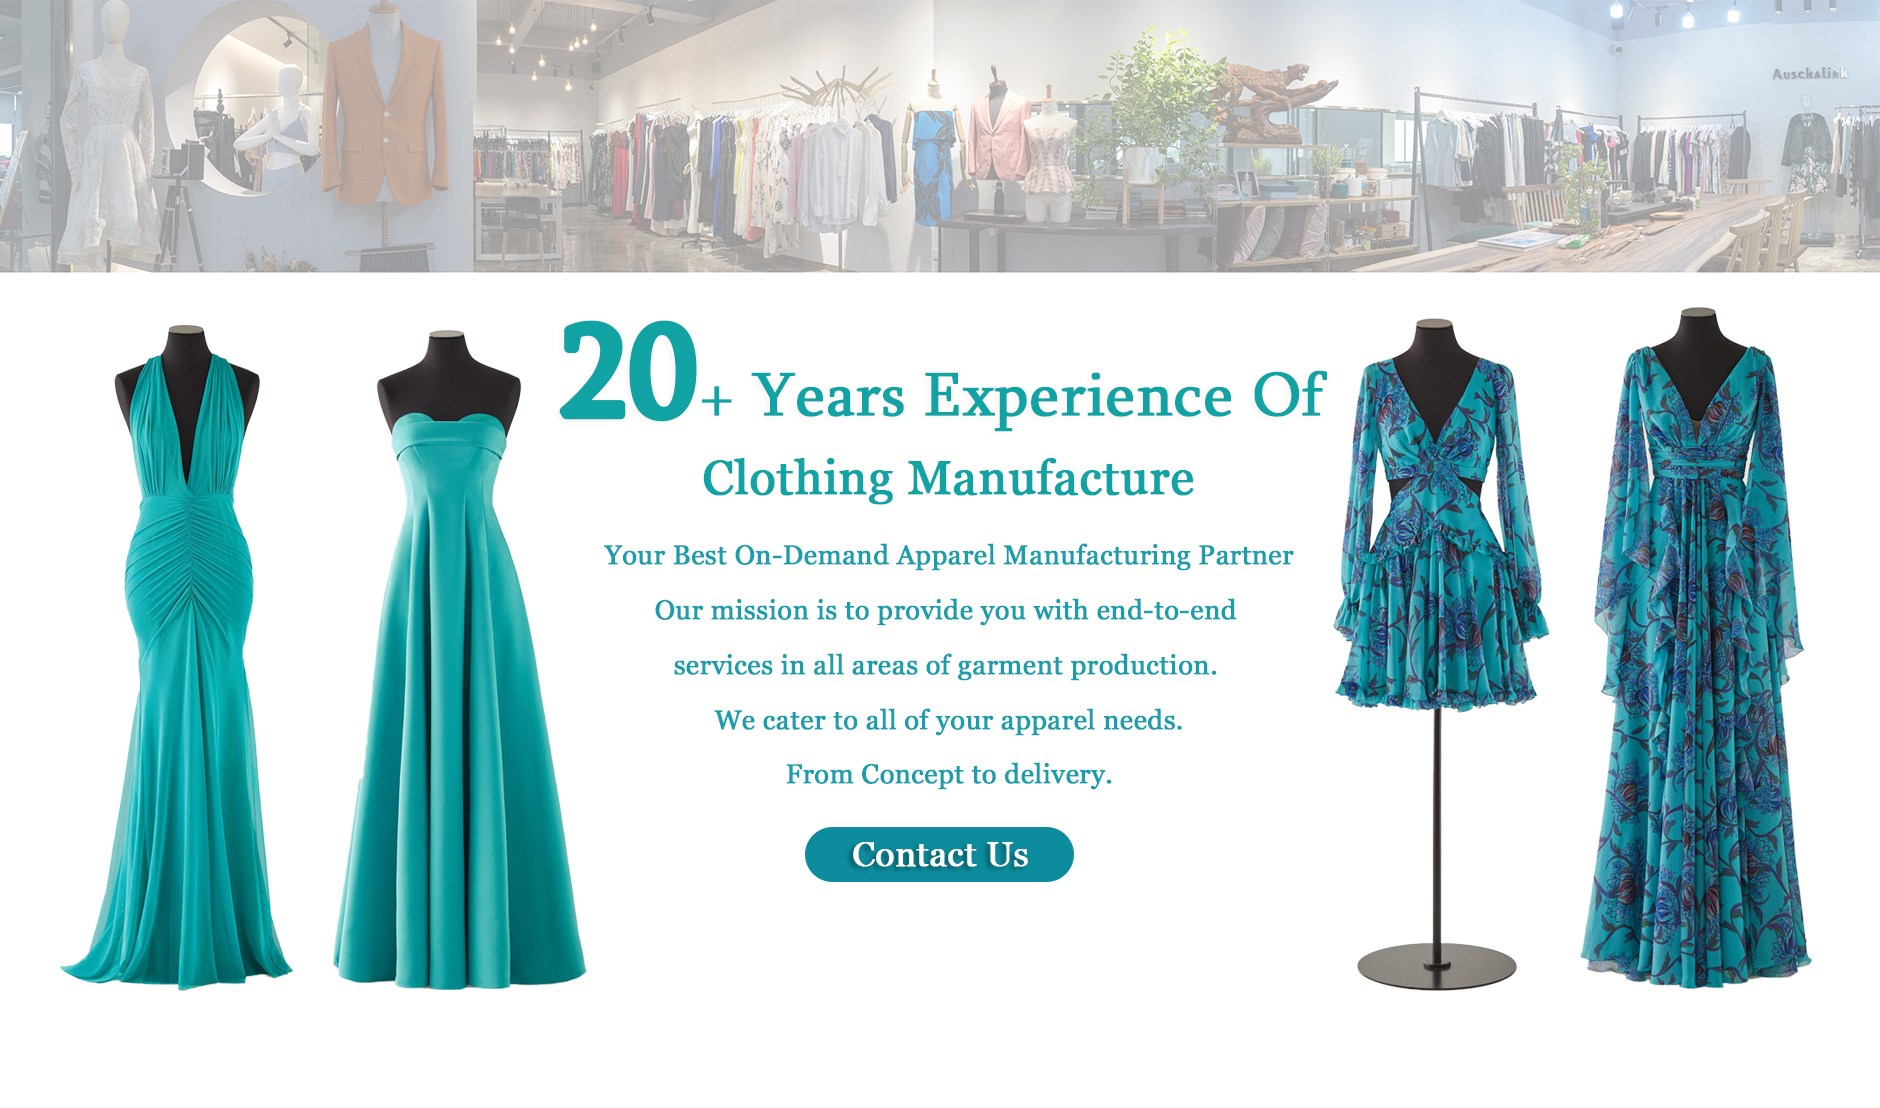 20+ Years Experience Of Clothing Manufacture